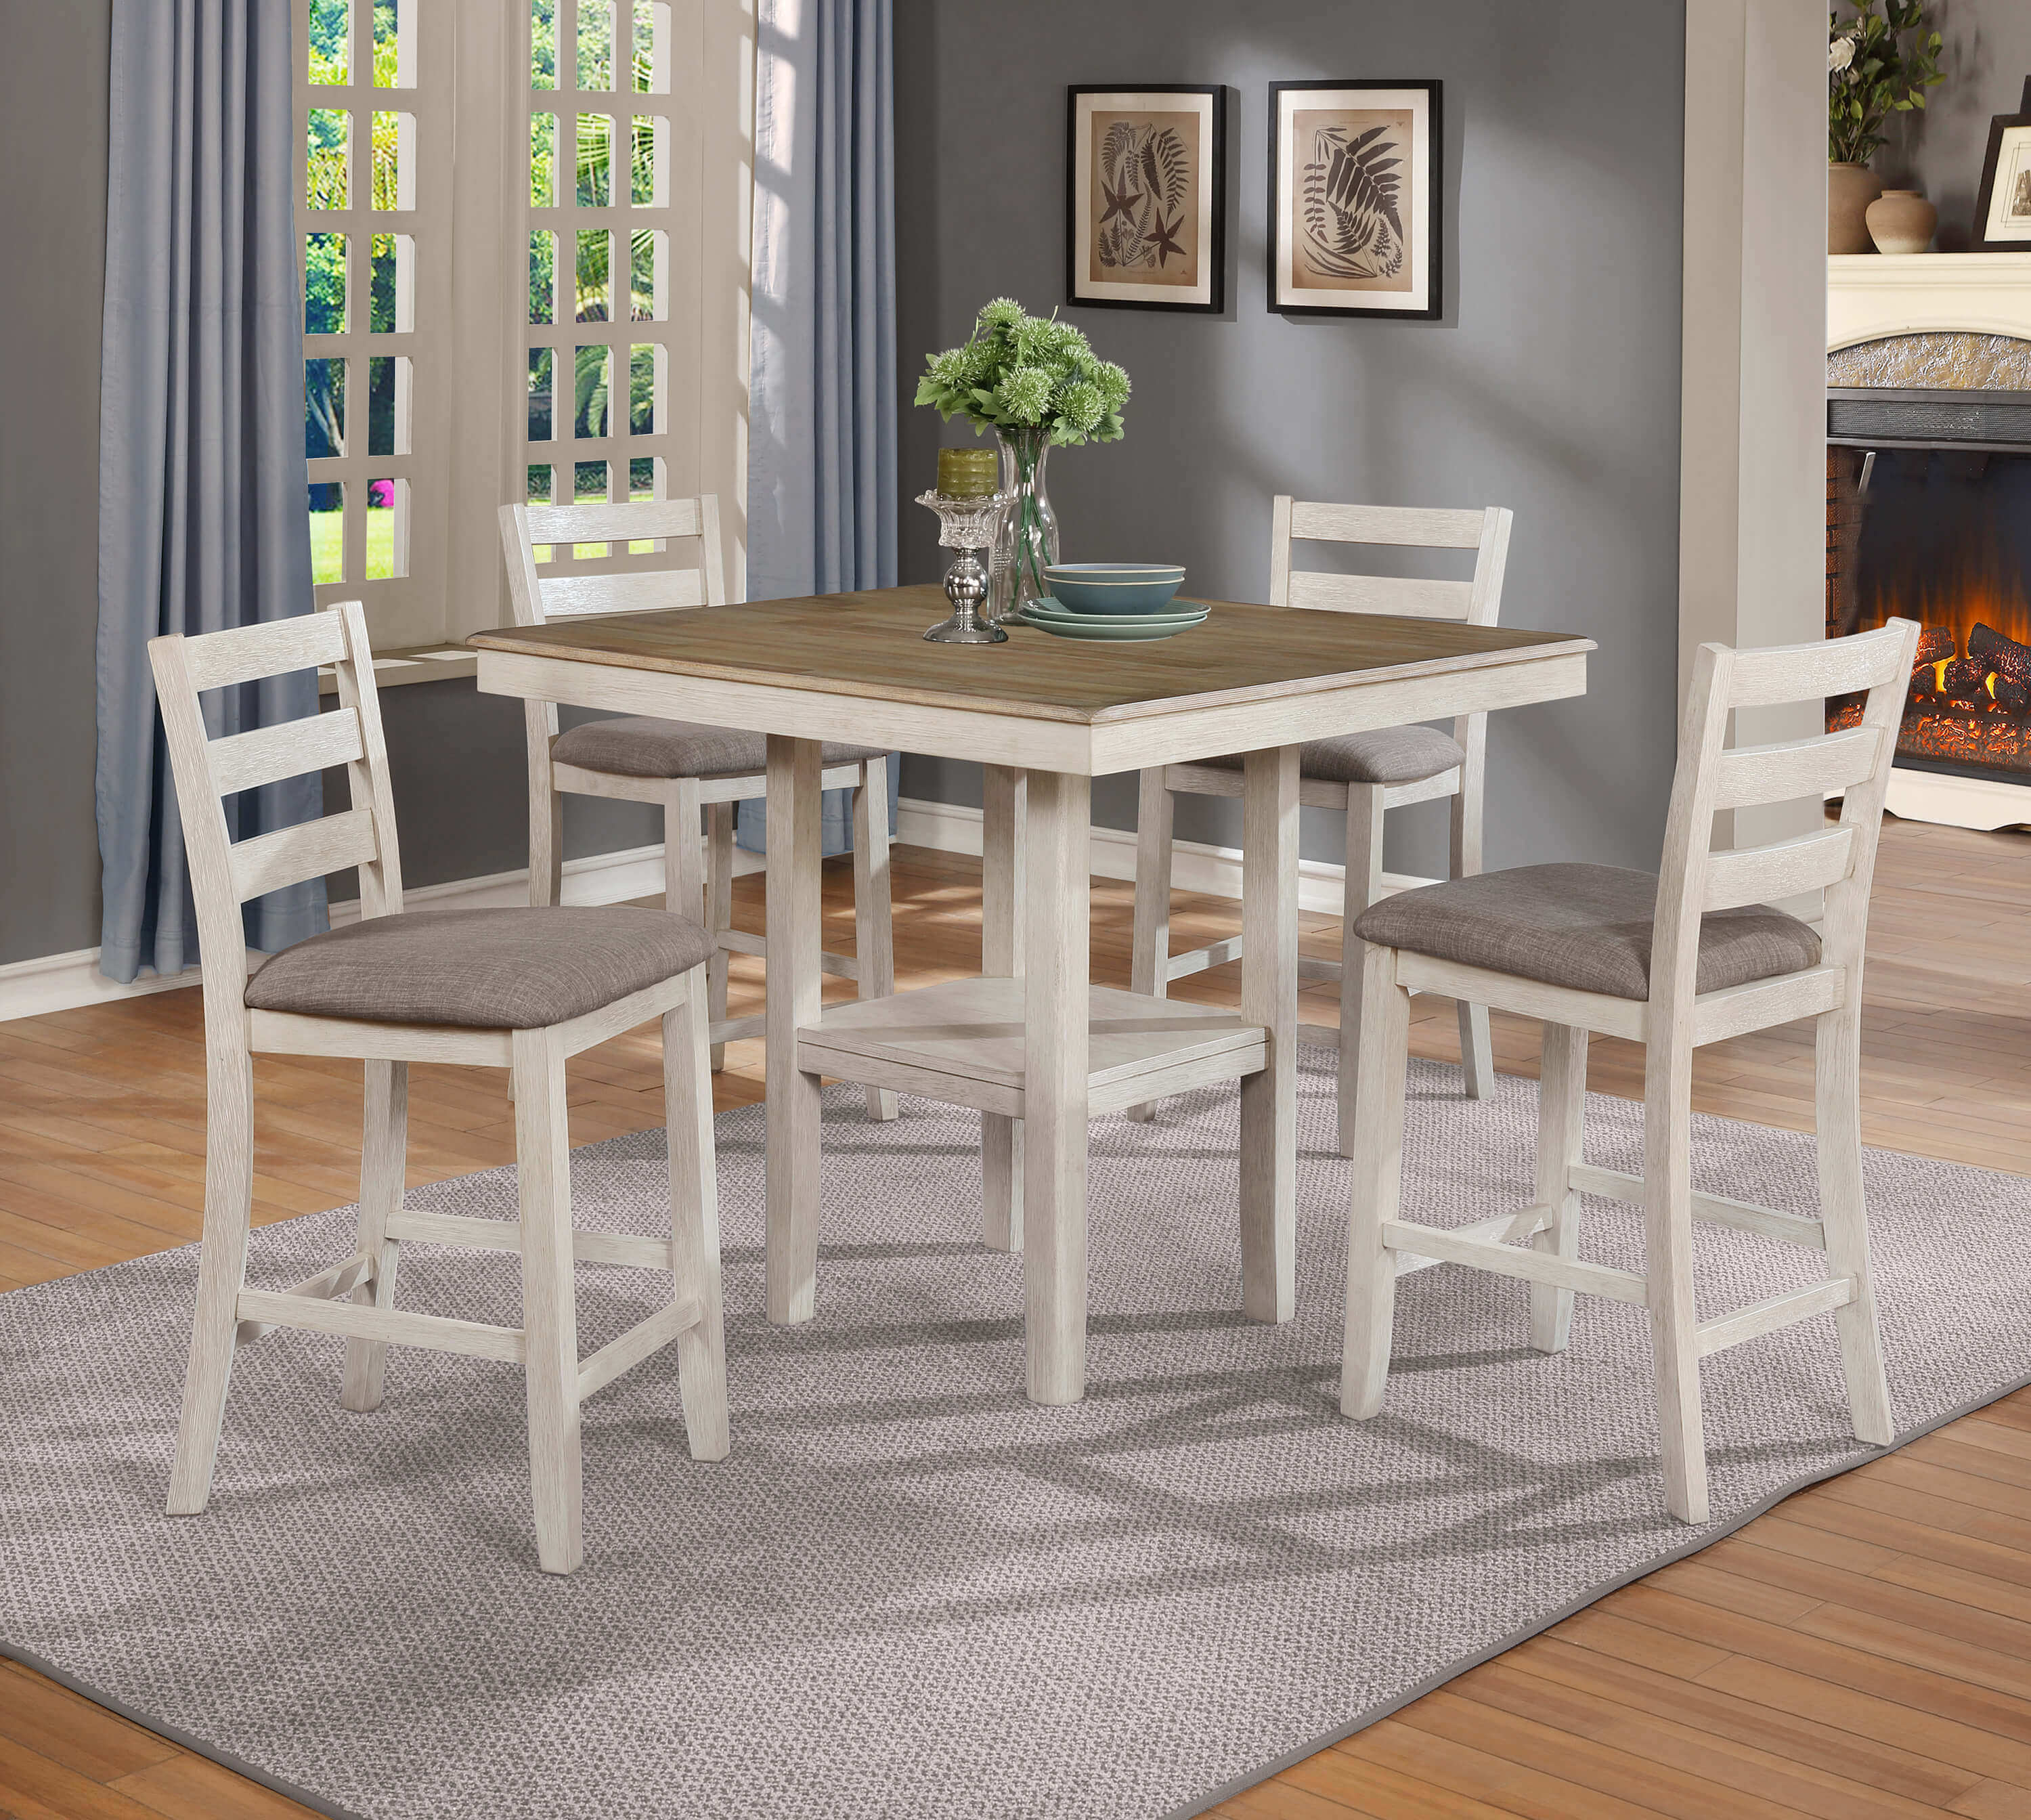 Tahoe White Counter Height Set | Dining Room Furniture Sets